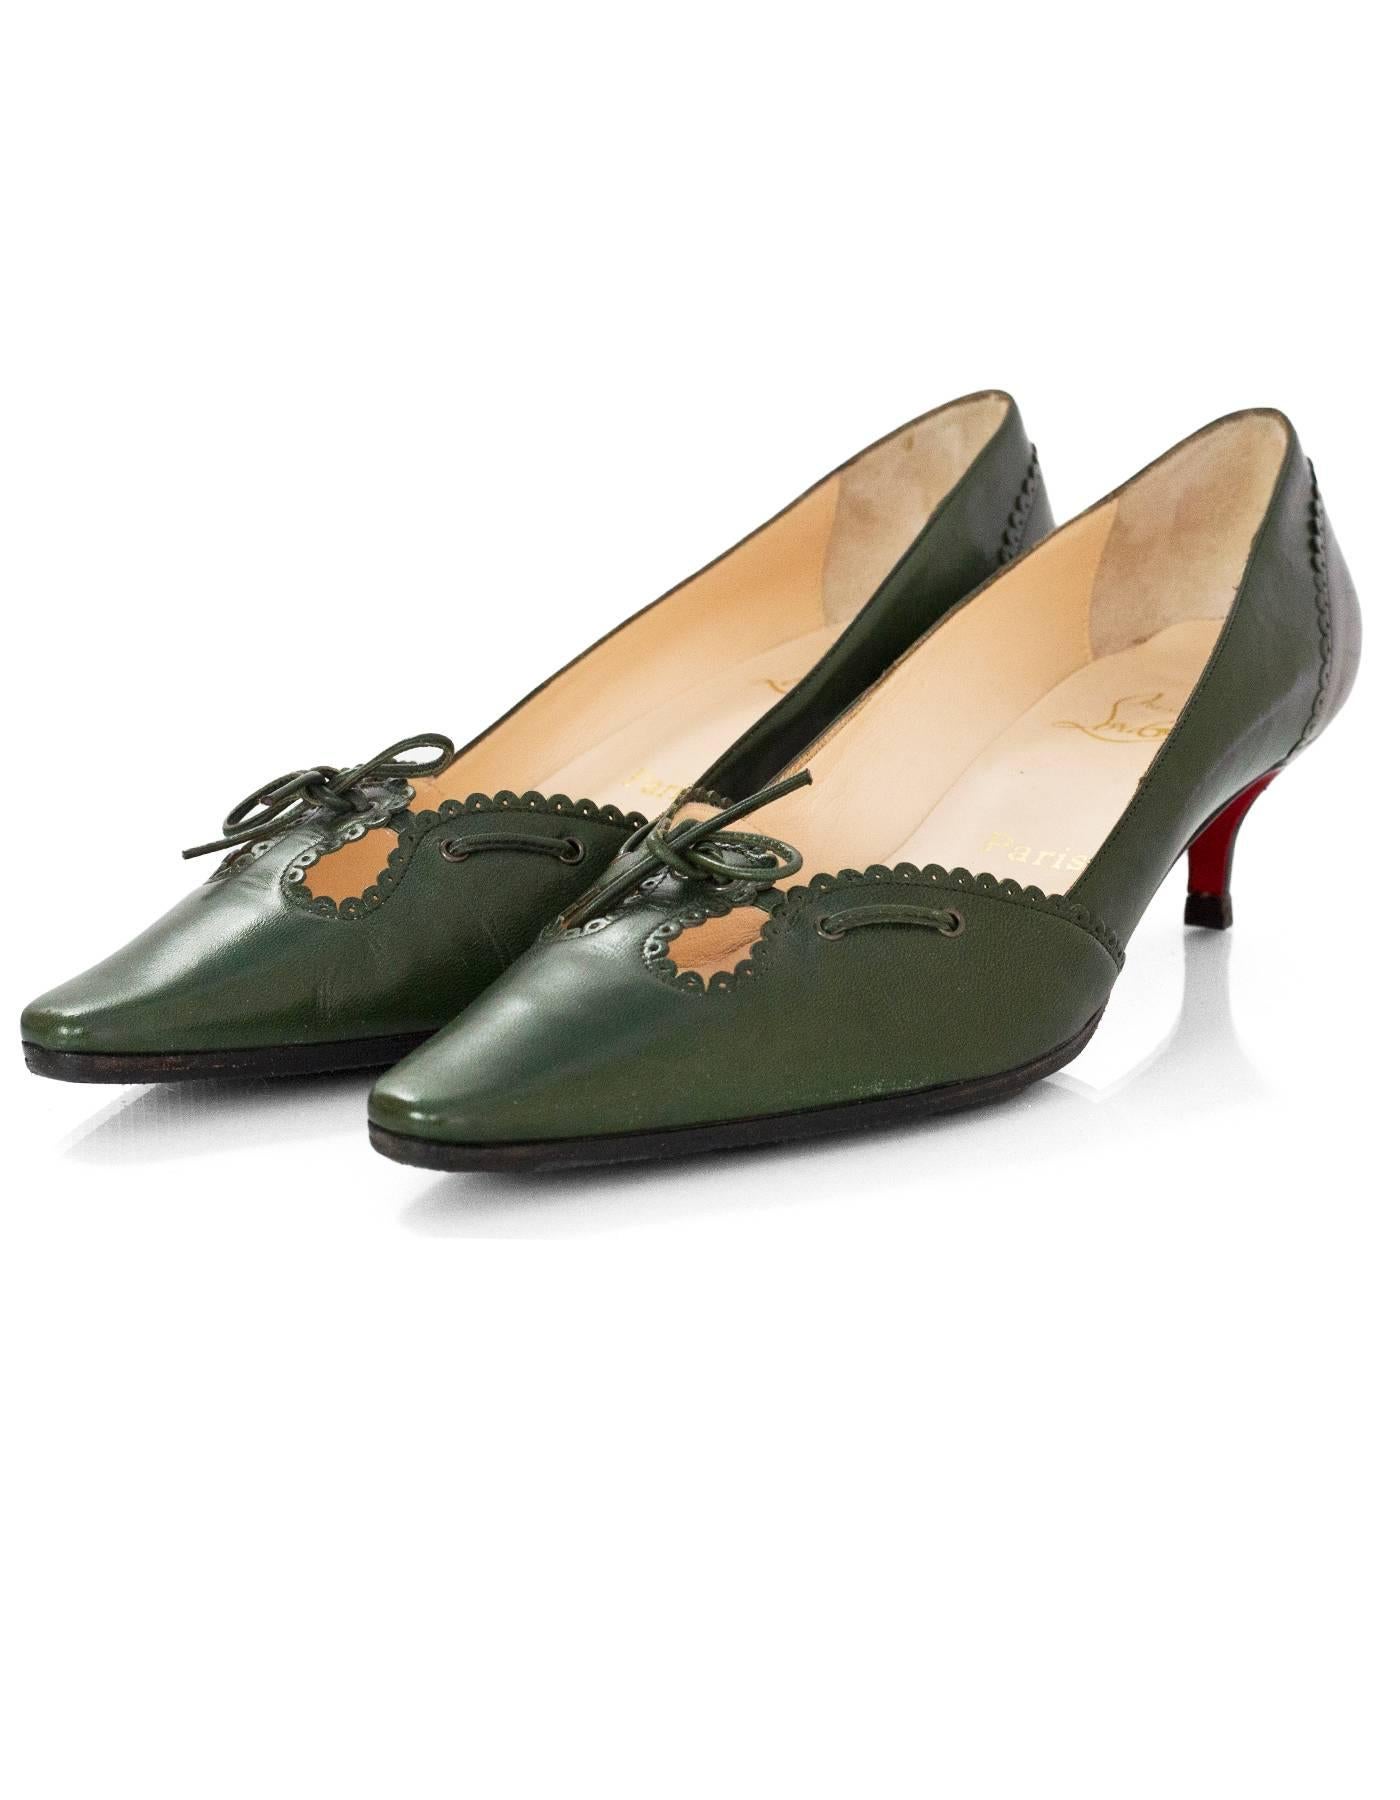 Christian Louboutin Green Leather Kitten Heels Sz 39.5

Made In: Italy
Color: Green
Materials: Leather
Closure/Opening: Slide on
Sole Stamp: Christian Louboutin vero cuoio made in Italy 39.5
Overall Condition: Excellent pre-owned condition with the